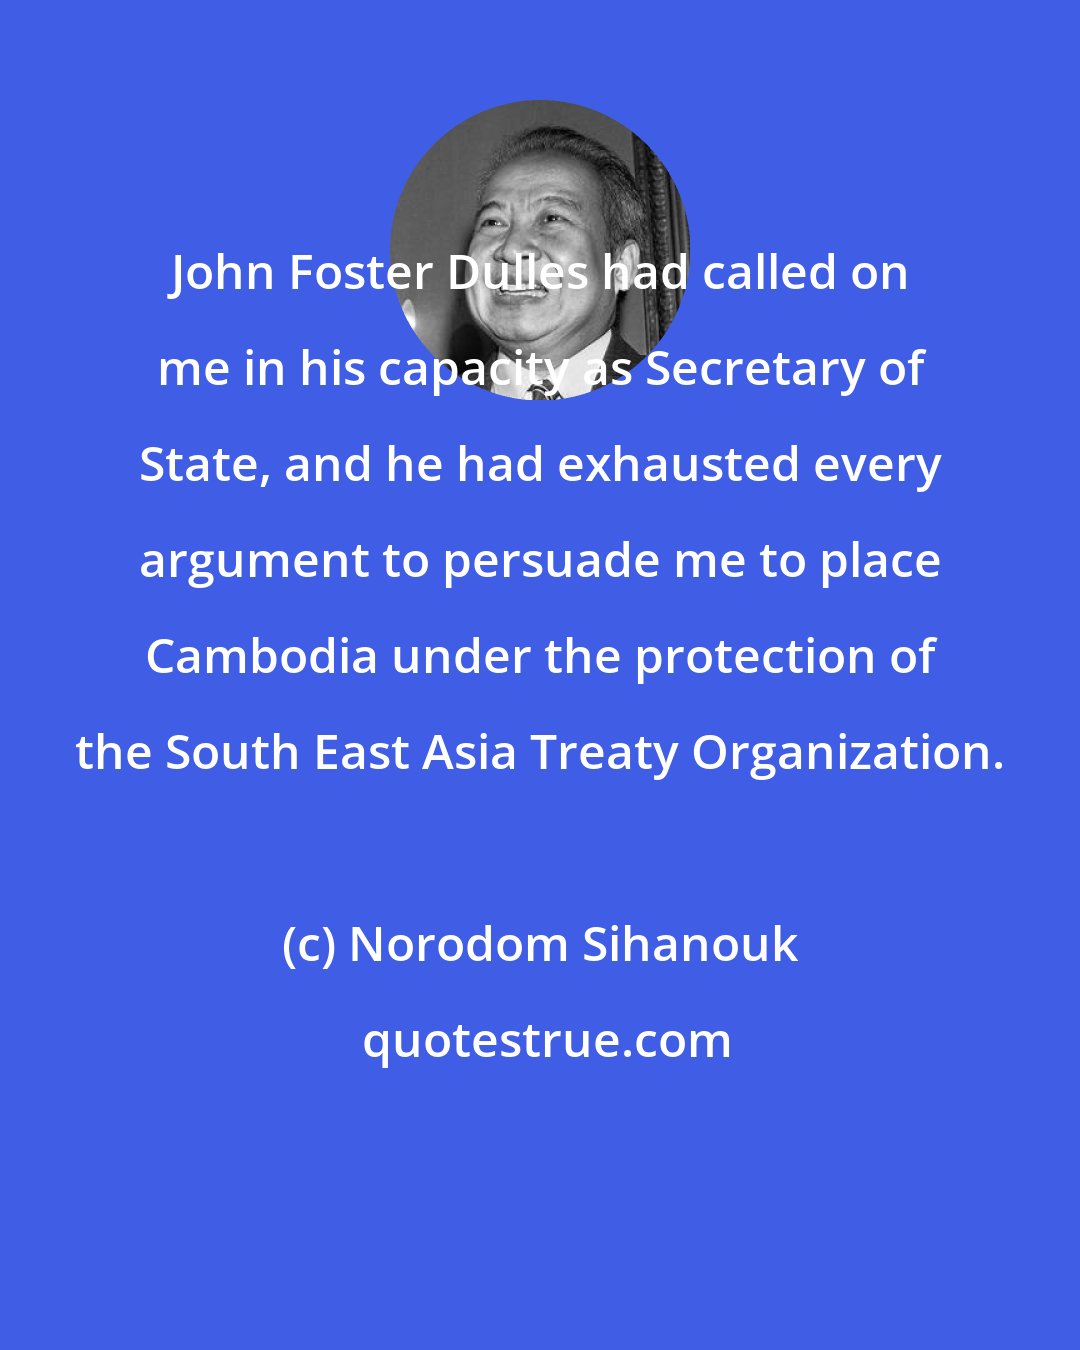 Norodom Sihanouk: John Foster Dulles had called on me in his capacity as Secretary of State, and he had exhausted every argument to persuade me to place Cambodia under the protection of the South East Asia Treaty Organization.